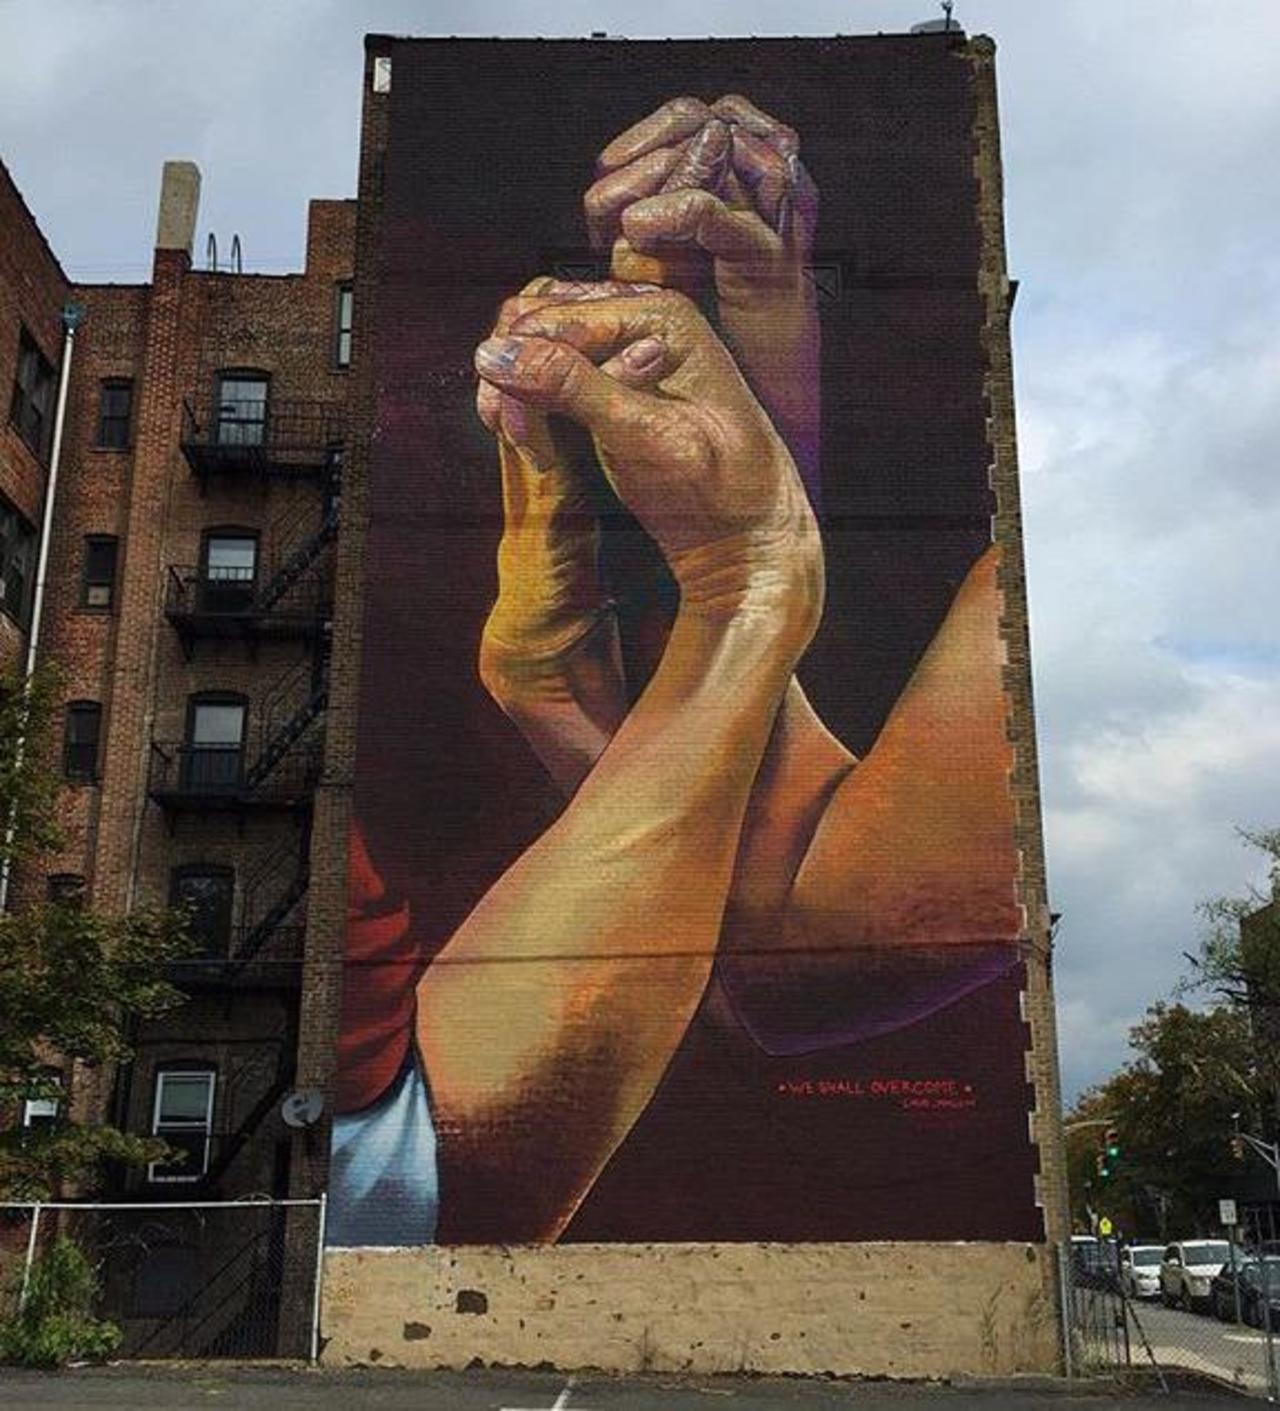 New Street Art by CaseMaclaim in Jersey City for the TheBKcollective 

#art #graffiti #mural #streetart http://t.co/9mkiu9R8fA